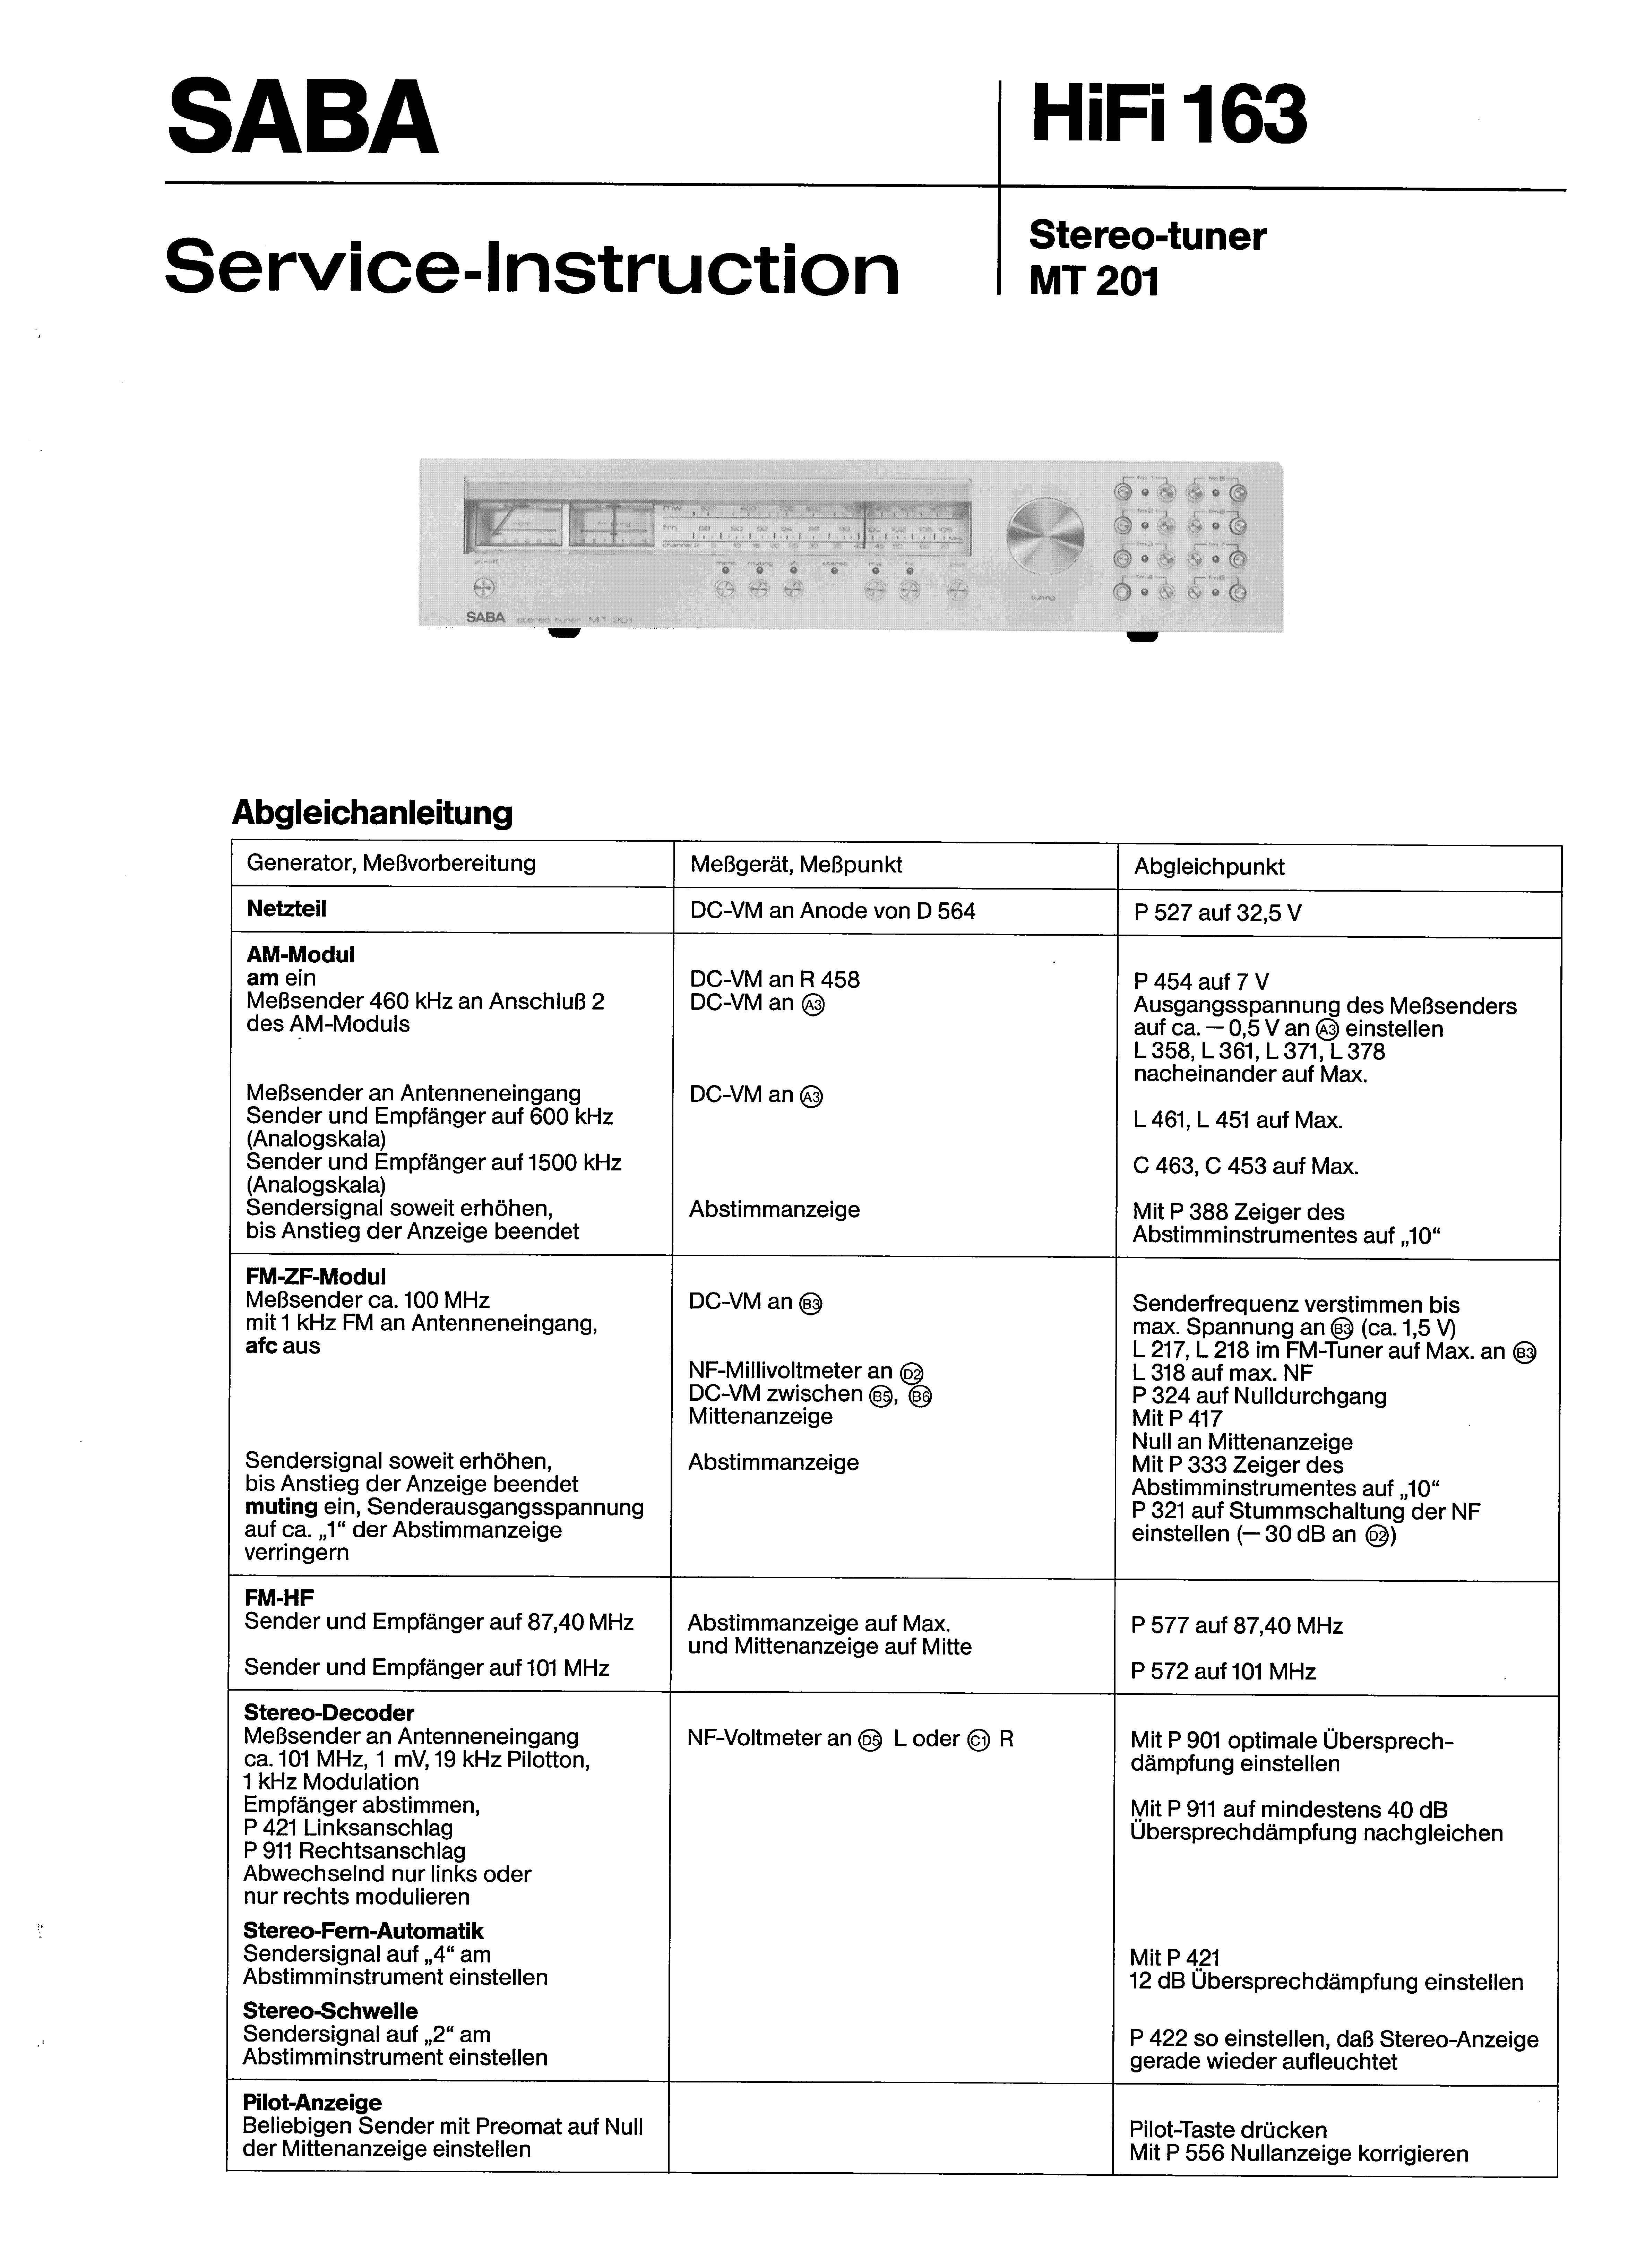 SABA STEREO-TUNER MT 201 SM service manual (1st page)